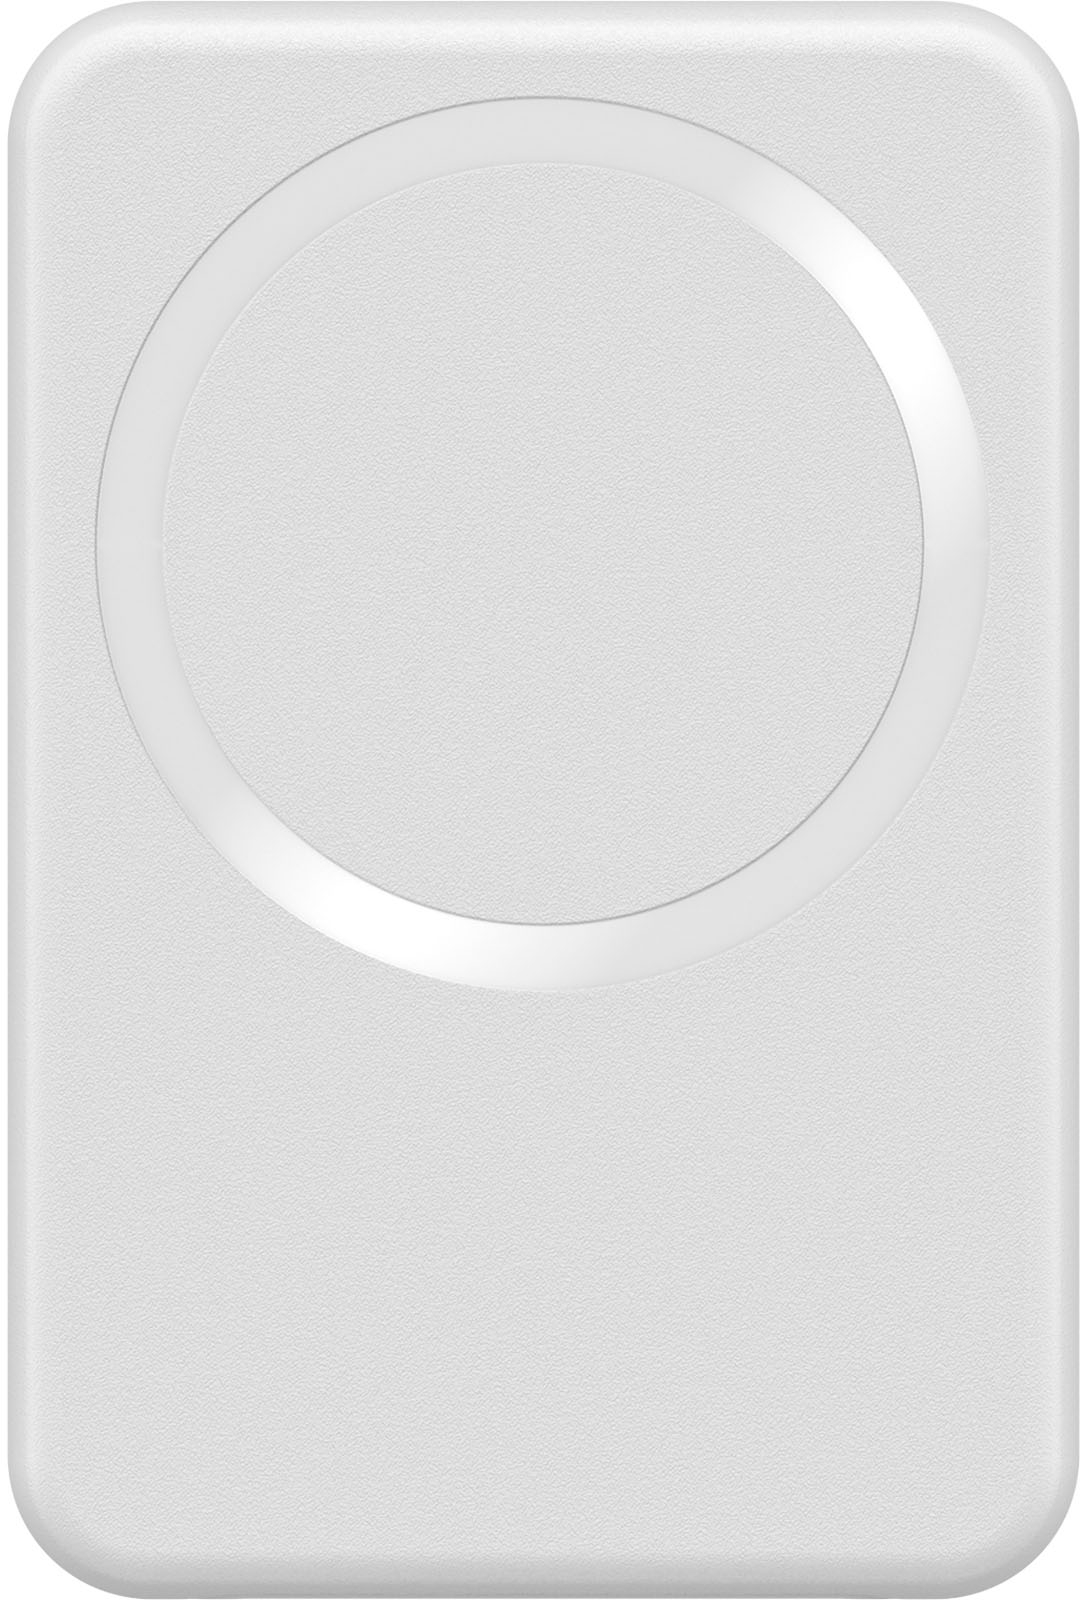 Best Buy: OtterBox 5k mAh Wireless Power Bank for MagSafe White 78-80566